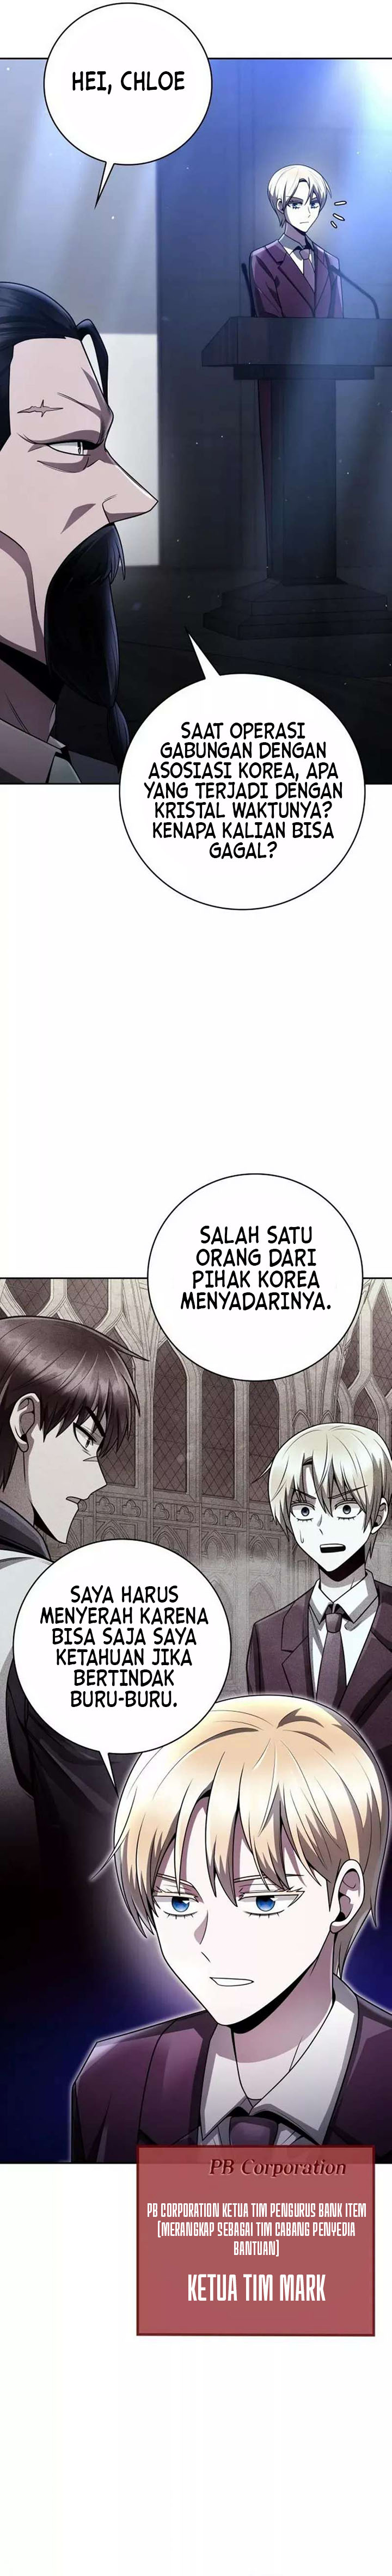 Dilarang COPAS - situs resmi www.mangacanblog.com - Komik clever cleaning life of the returned genius hunter 044 - chapter 44 45 Indonesia clever cleaning life of the returned genius hunter 044 - chapter 44 Terbaru 8|Baca Manga Komik Indonesia|Mangacan